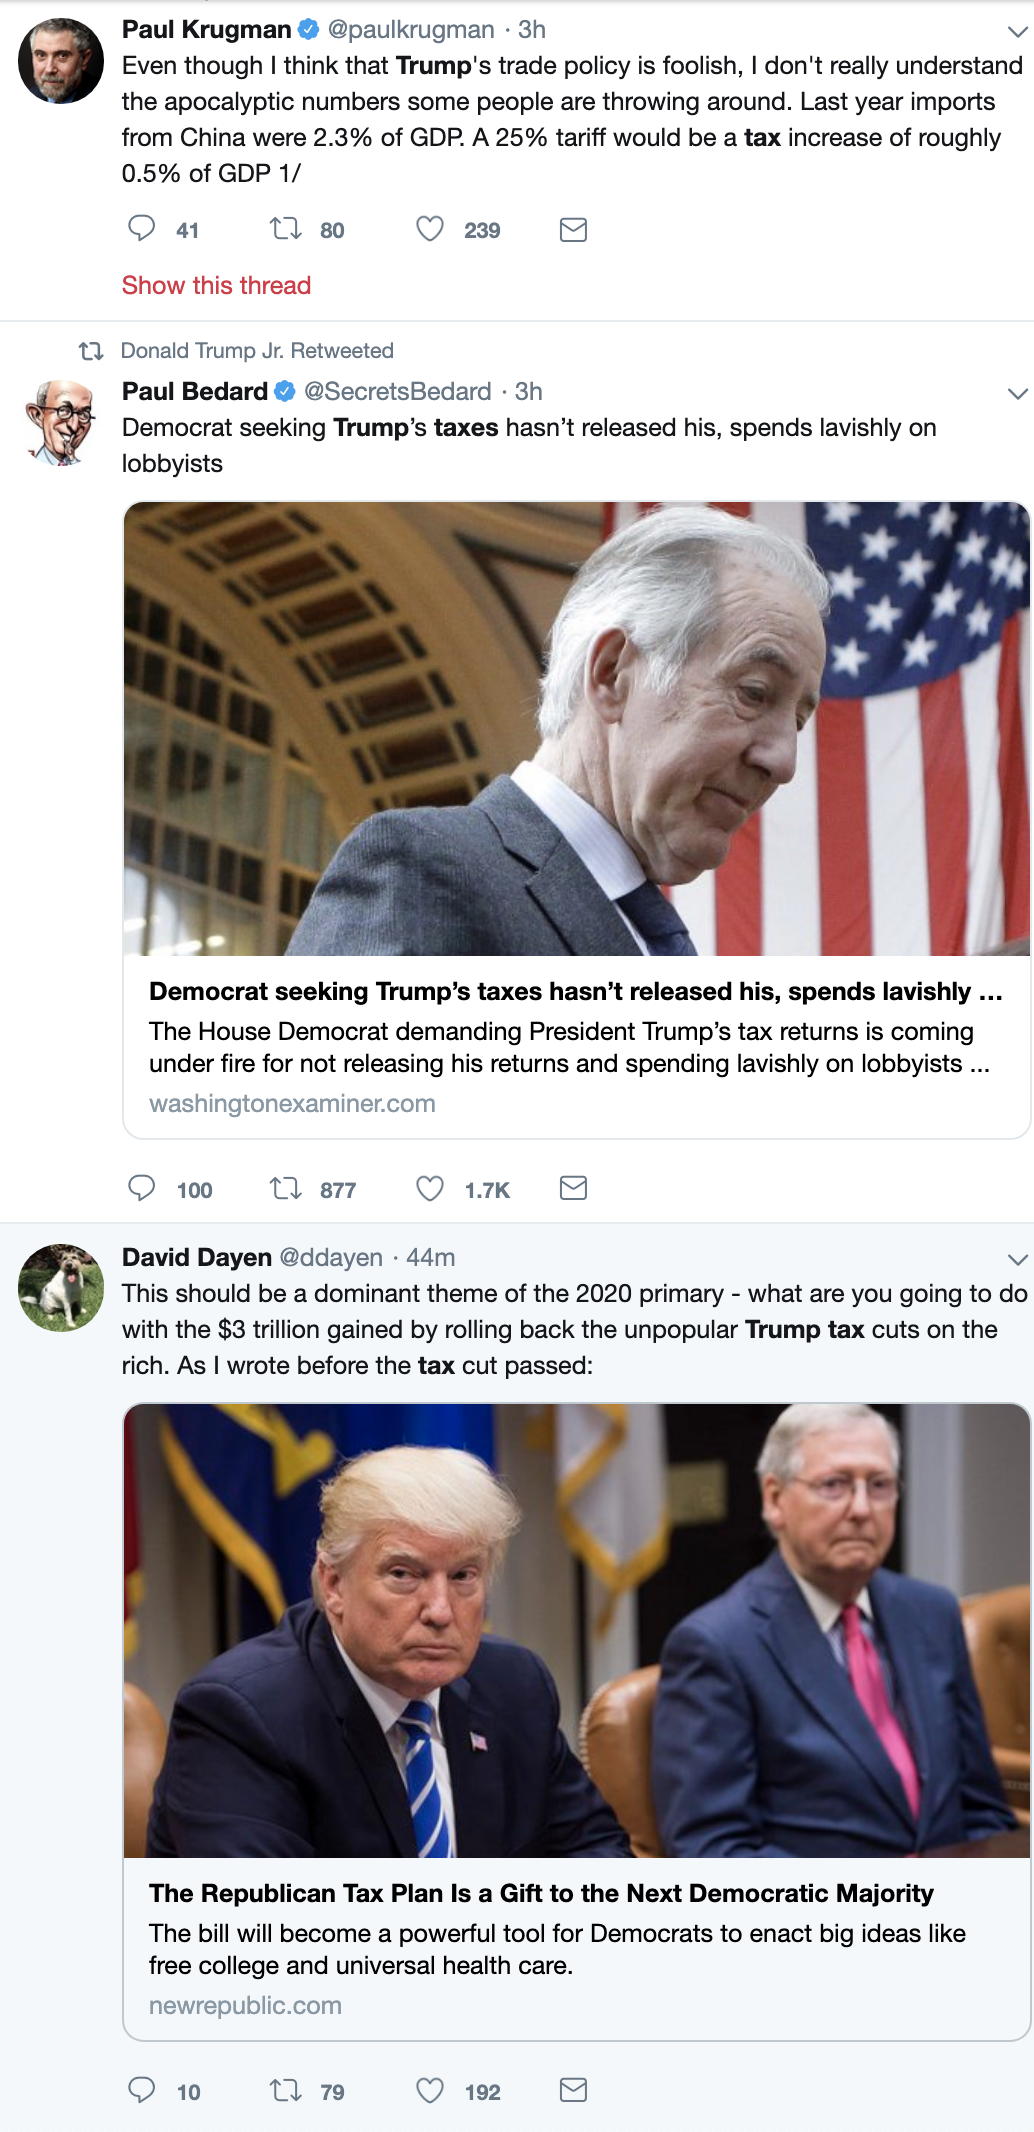 Screen-Shot-2019-05-07-at-2.24.47-PM NY State Joins Forces With D.C. House To Overrule Trump - Donald Panics Corruption Crime Donald Trump Investigation Politics Top Stories 